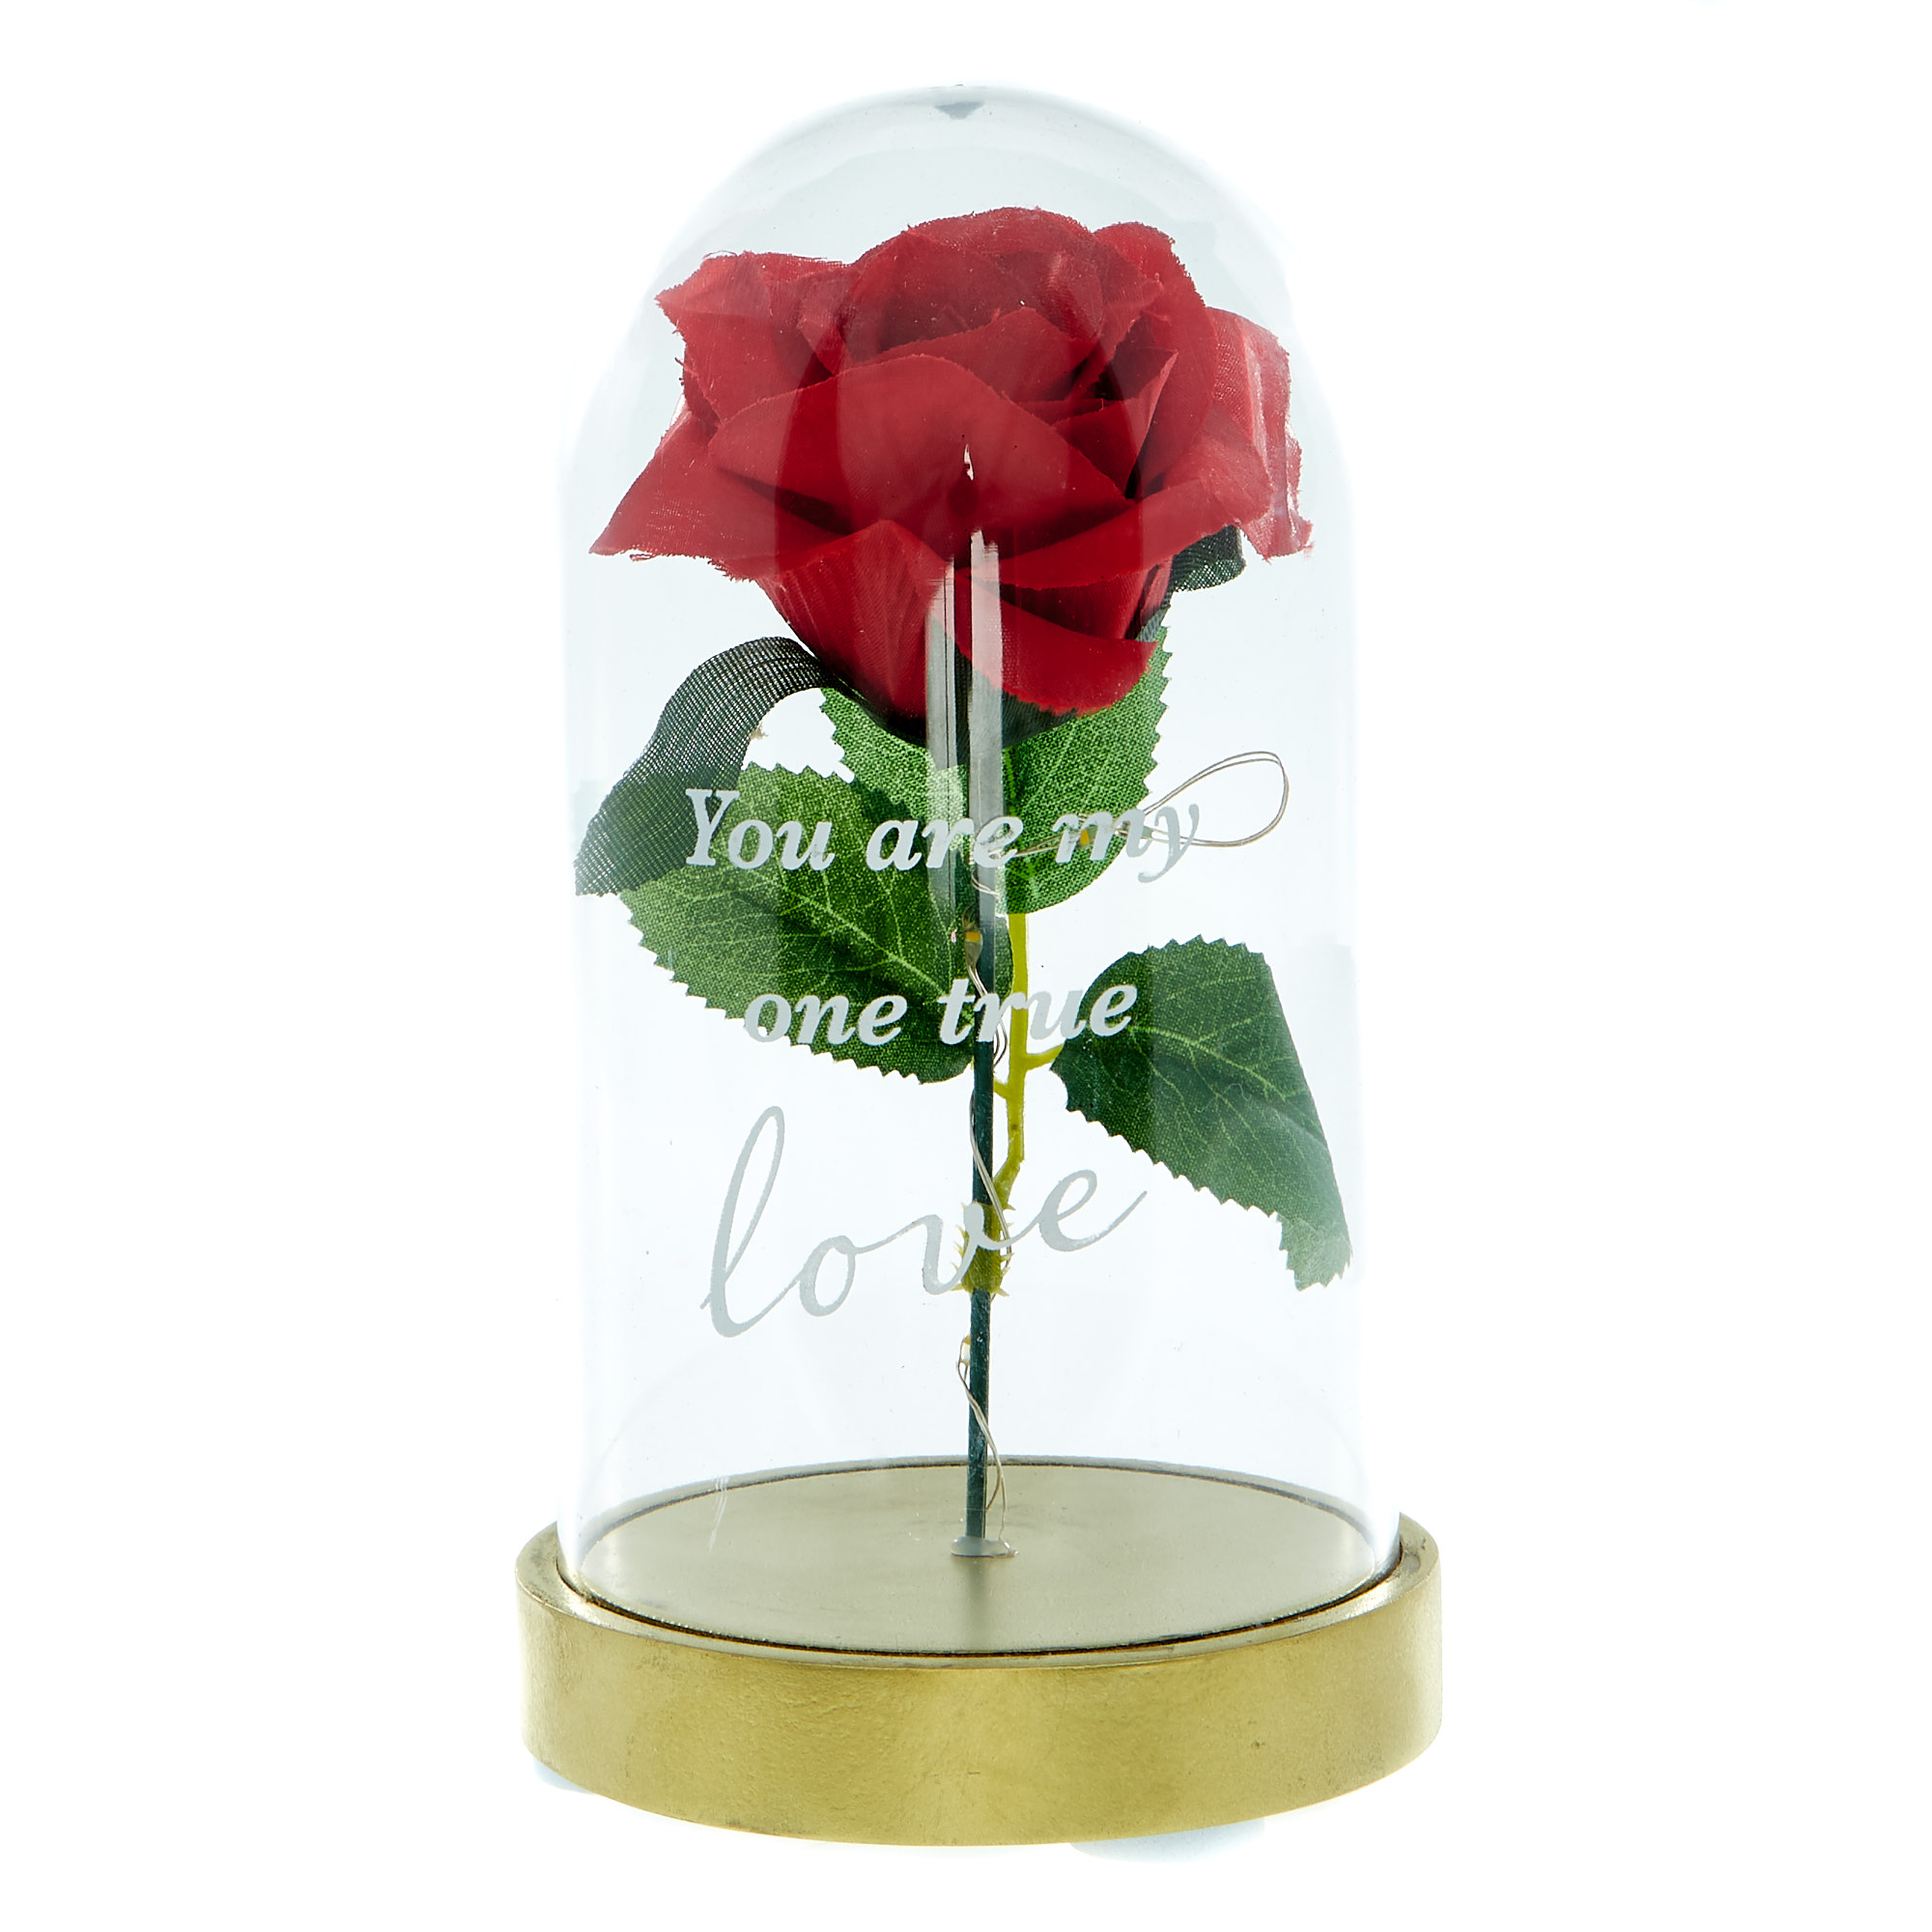 Light-up Artificial Rose in Dome